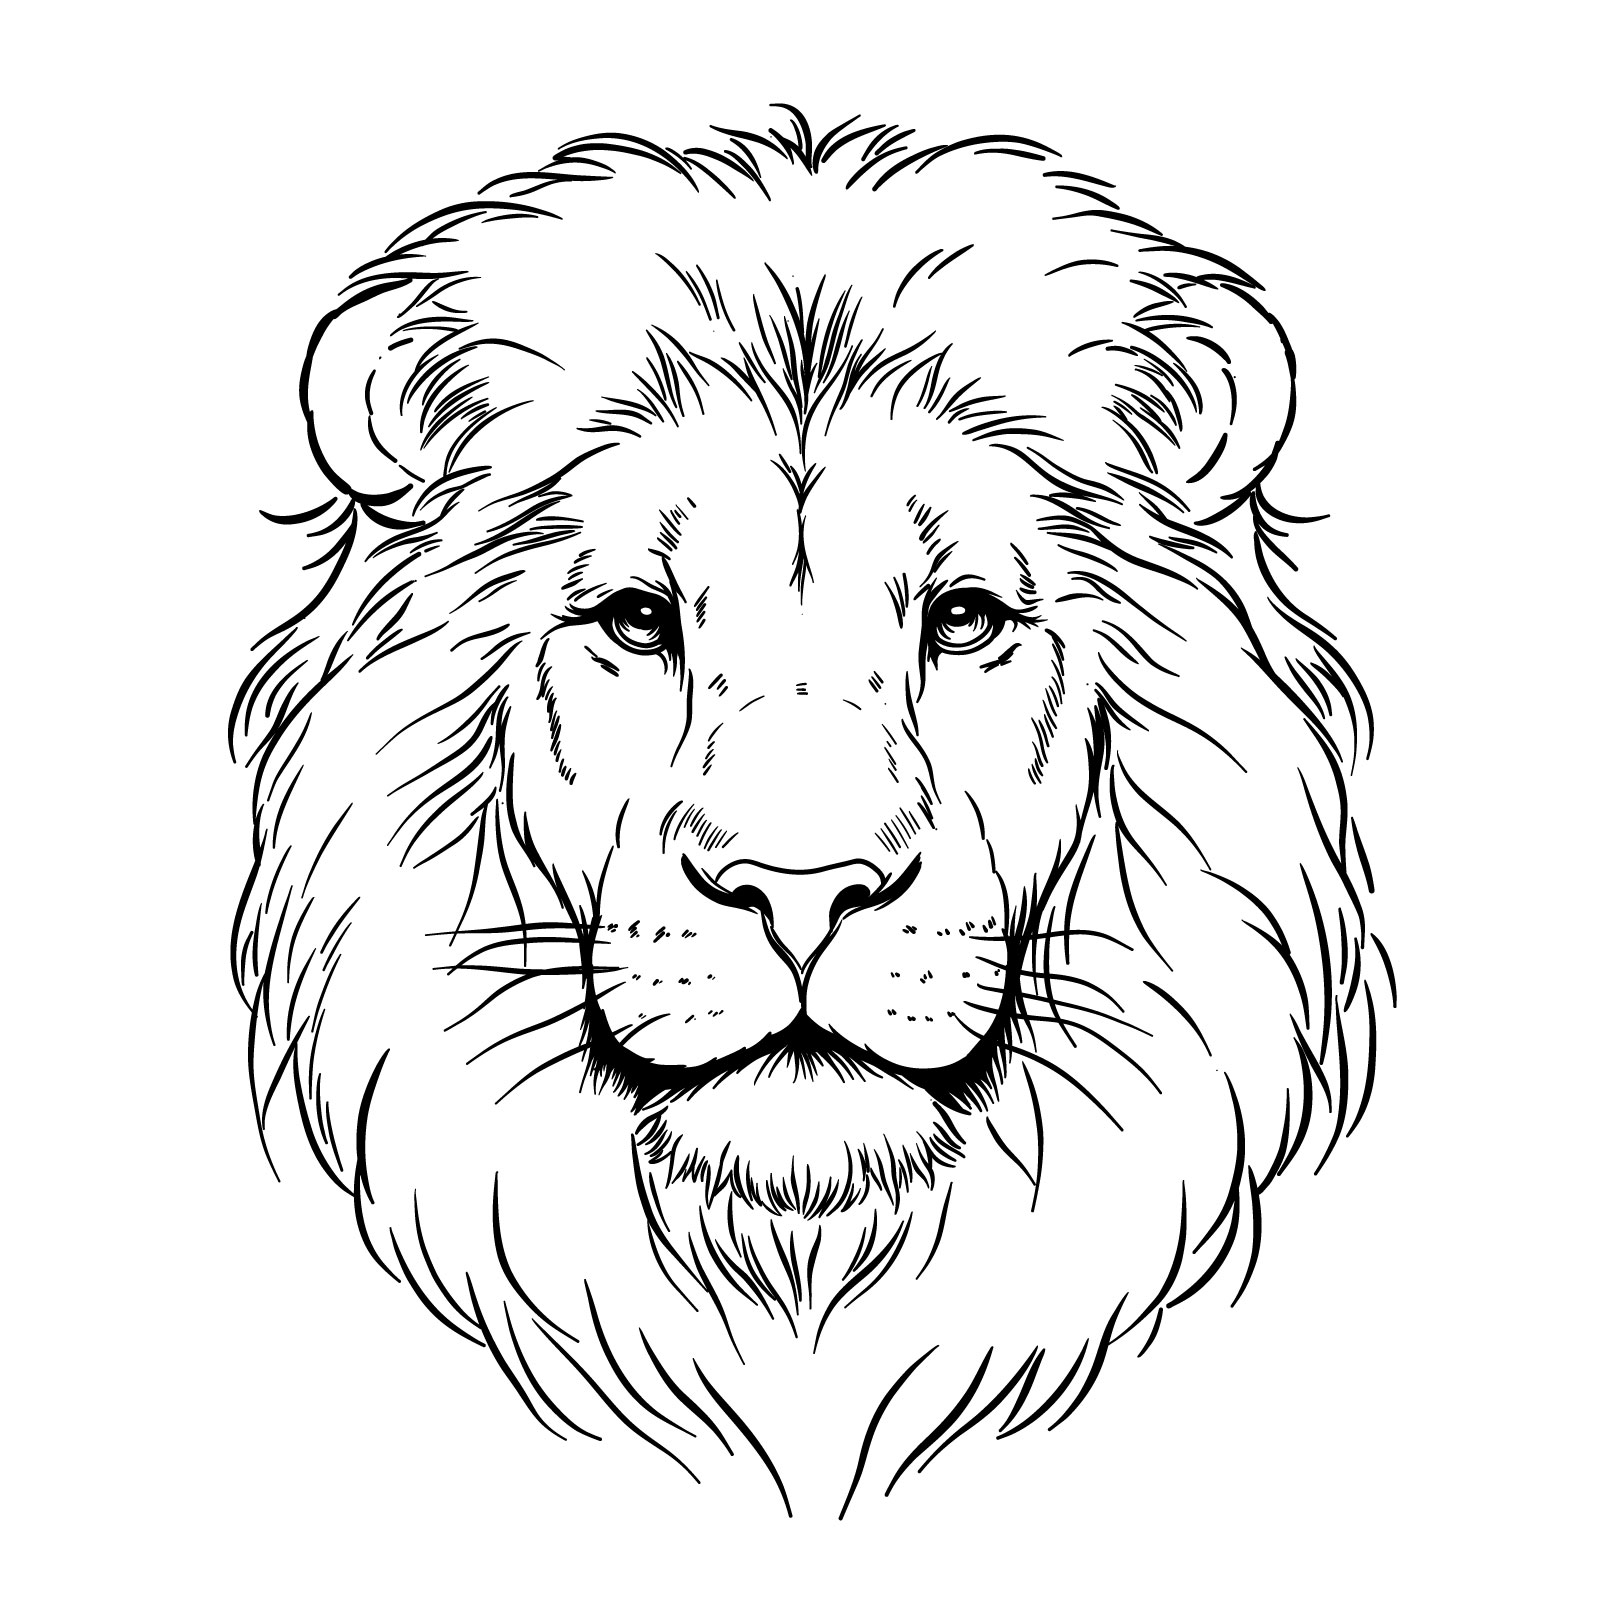 How to draw a realistic lion's face in front view - the finished drawing